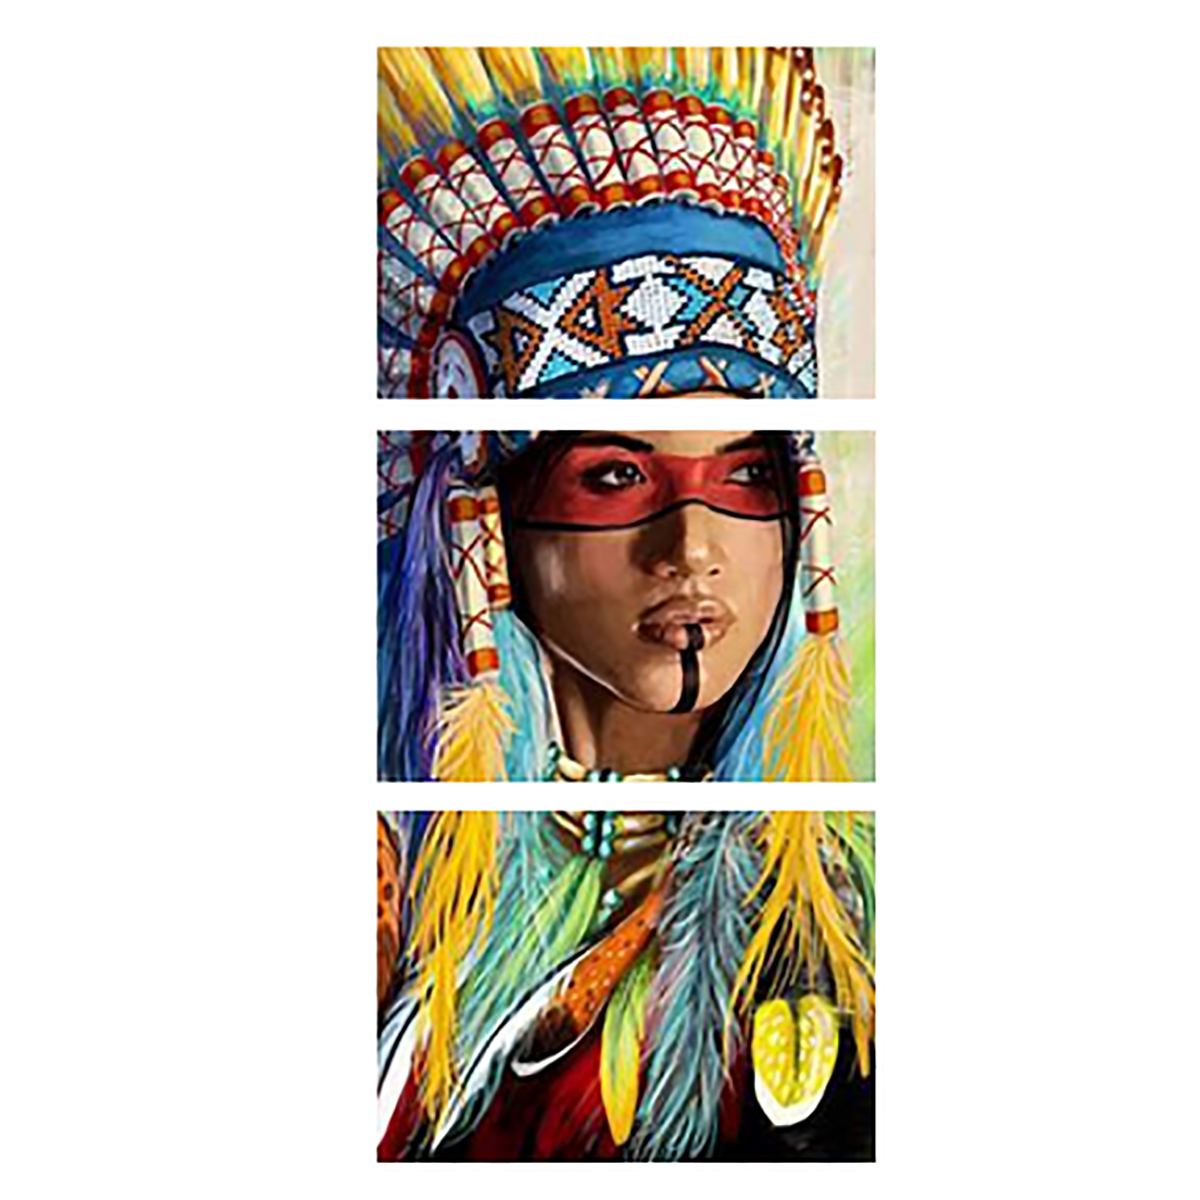 

3Pcs Canvas Print Paintings Indian Girl Oil Painting Wall Decorative Printing Art Picture Frameless Home Office Decorati